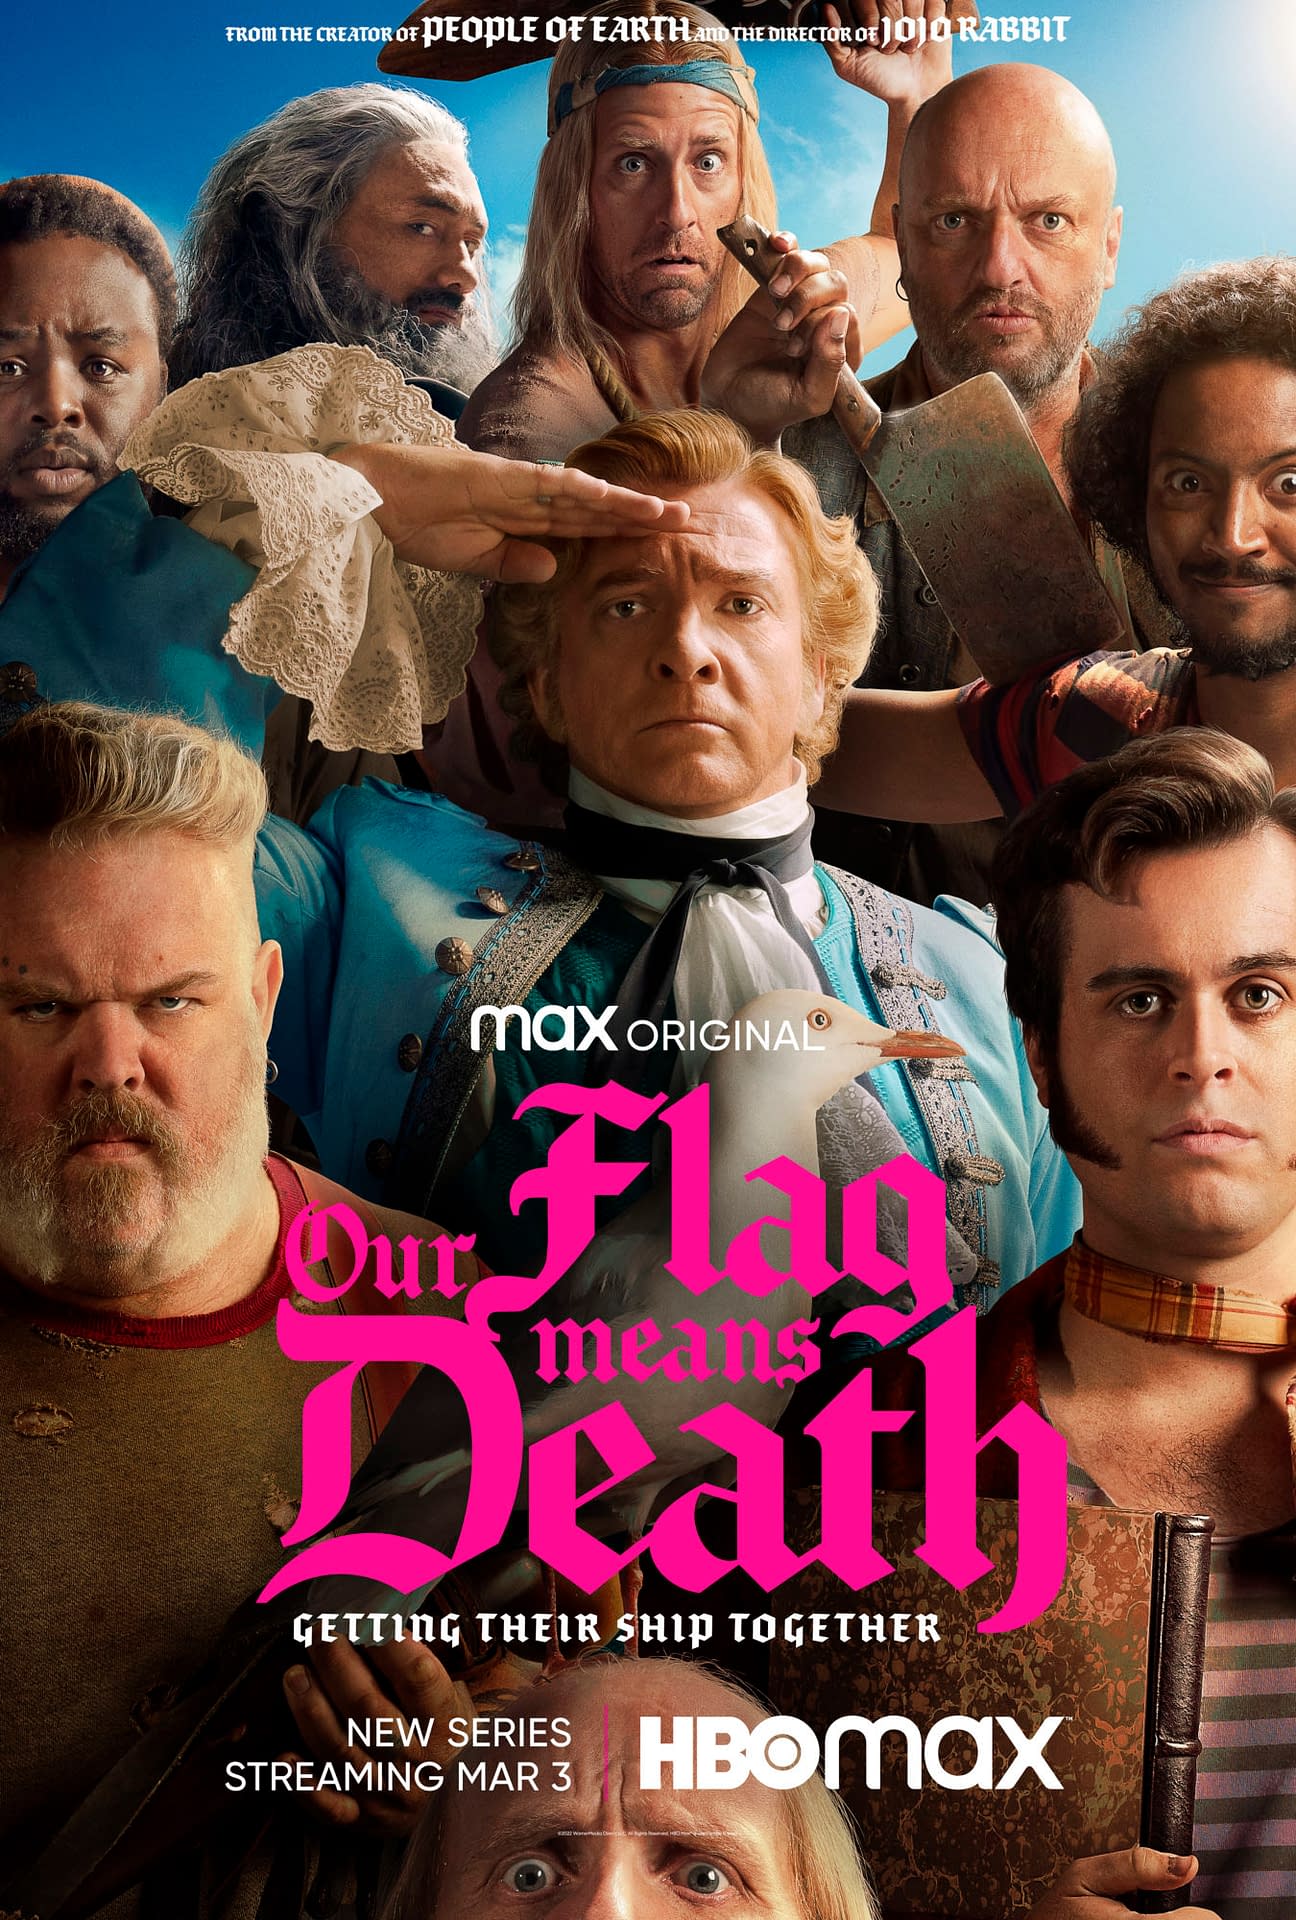 Our Flag Means Death Sets Sail This March; Trailer, Key Art Released